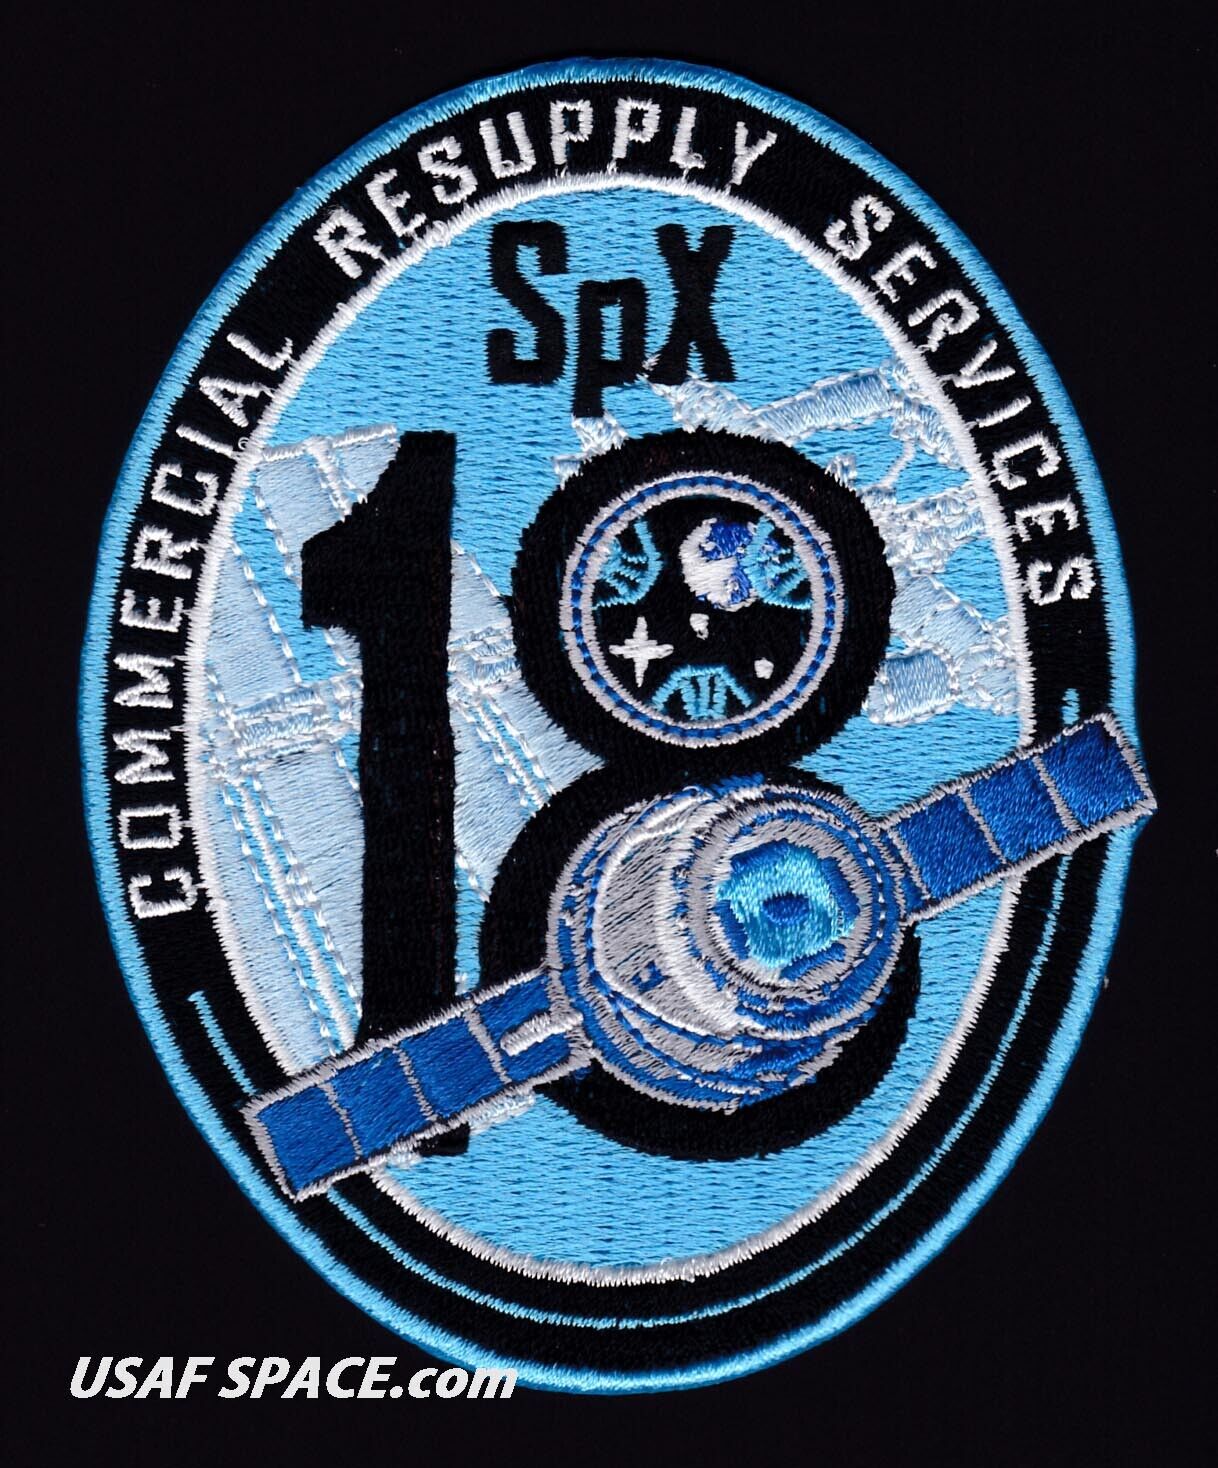 Authentic SPX-18 - SPACEX CRS-18 NASA COMMERCIAL ISS RESUPPLY A-B Emblem PATCH